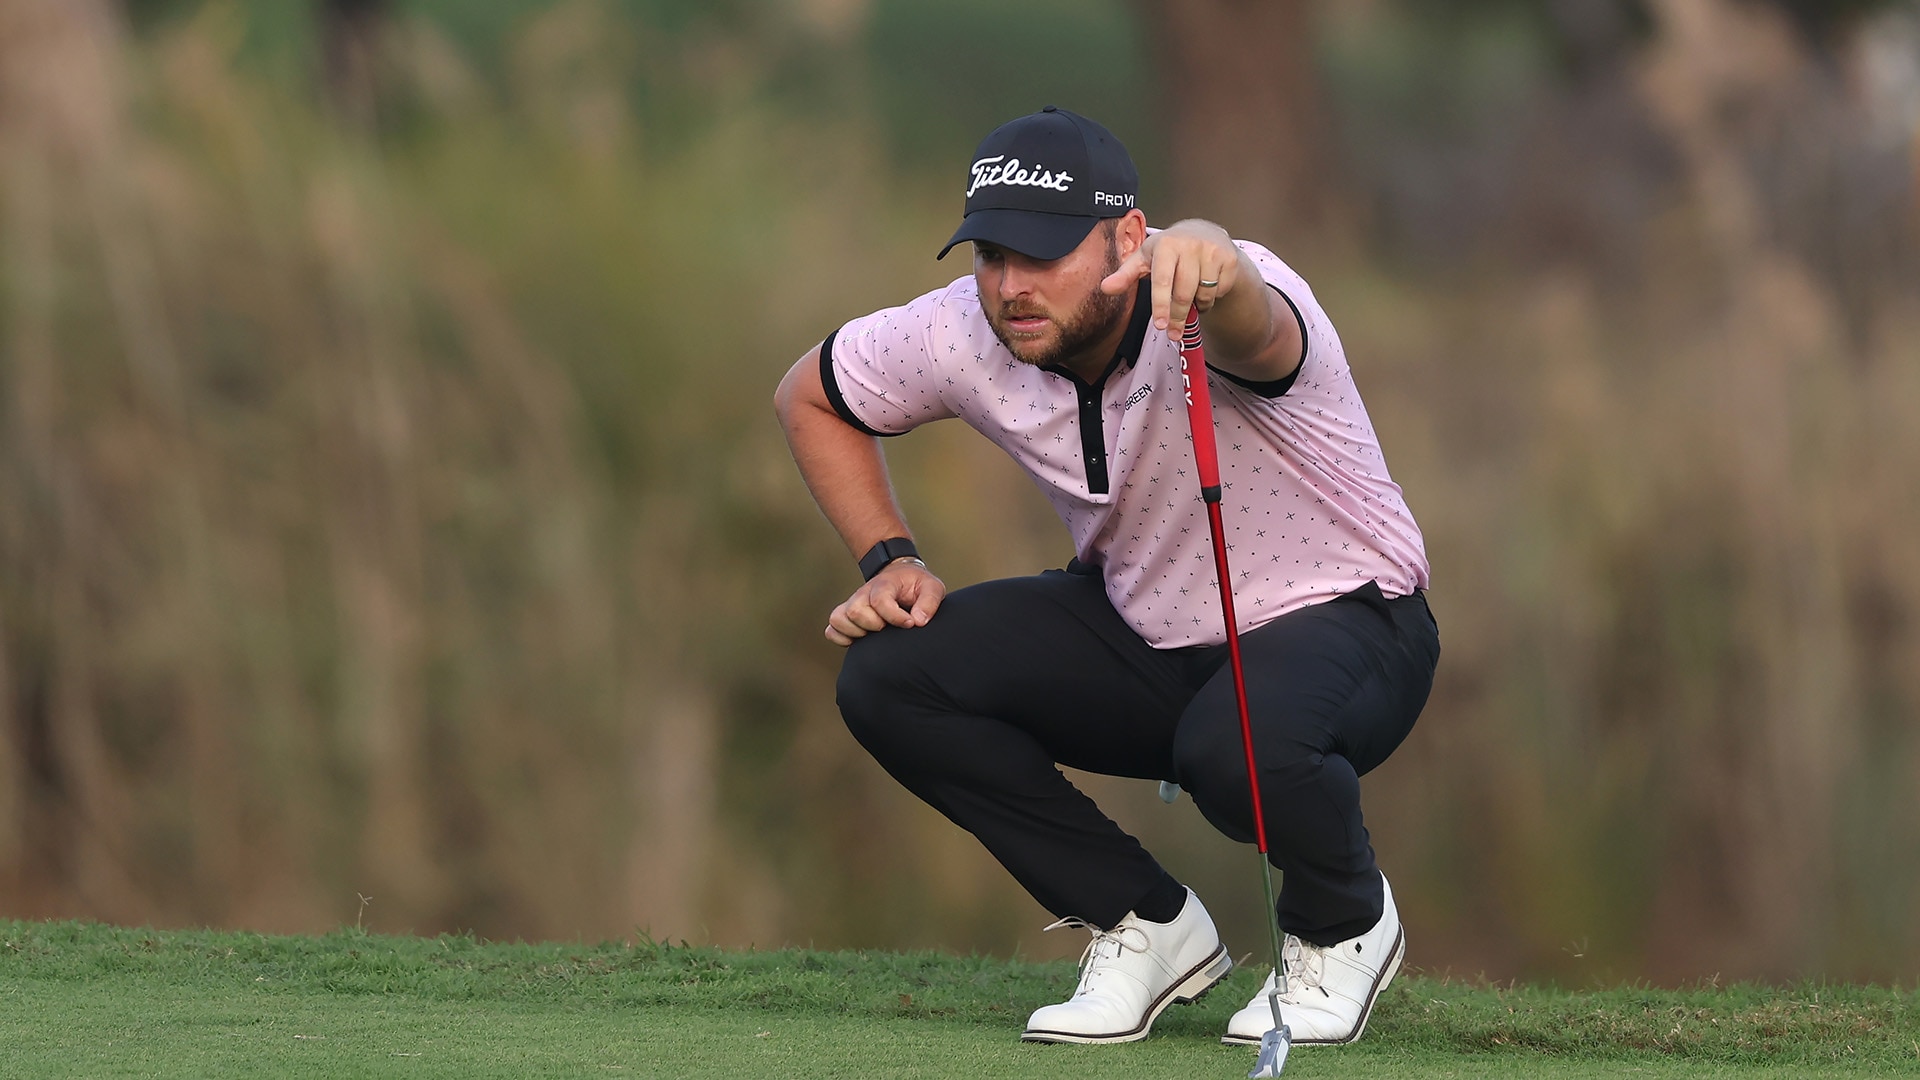 Jordan Smith keeps lead of Portugal Masters for 3rd straight day